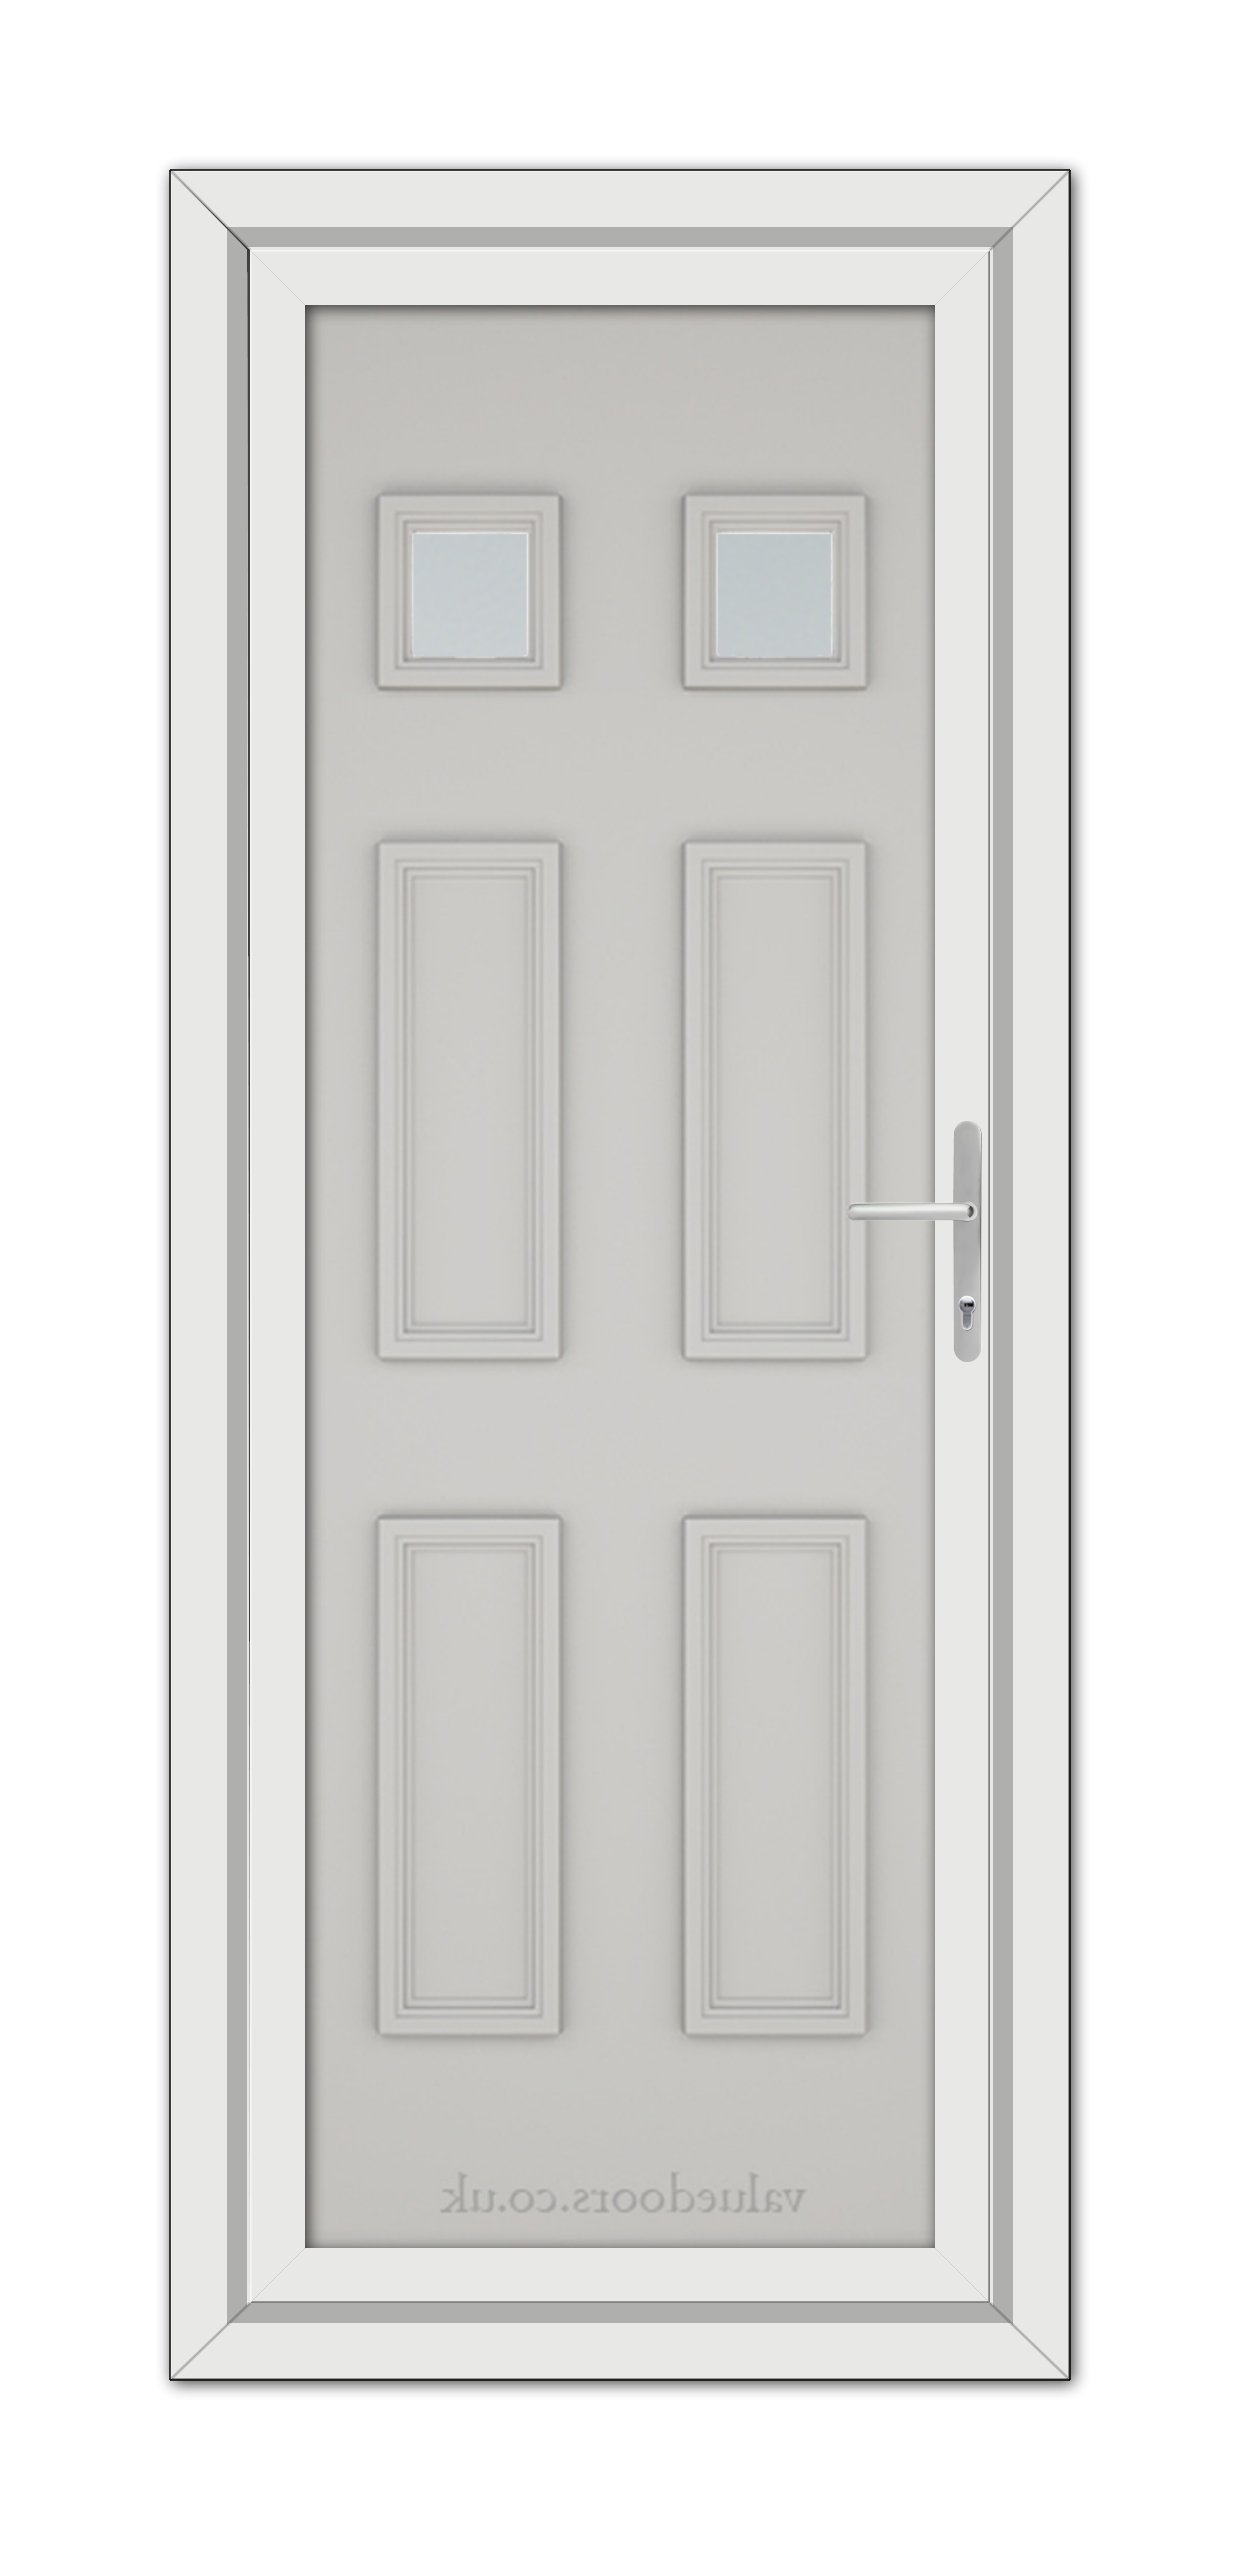 A modern, Silver Grey Windsor uPVC door featuring three small, square windows at the top and four vertical panels, complete with a metallic handle on the right side.